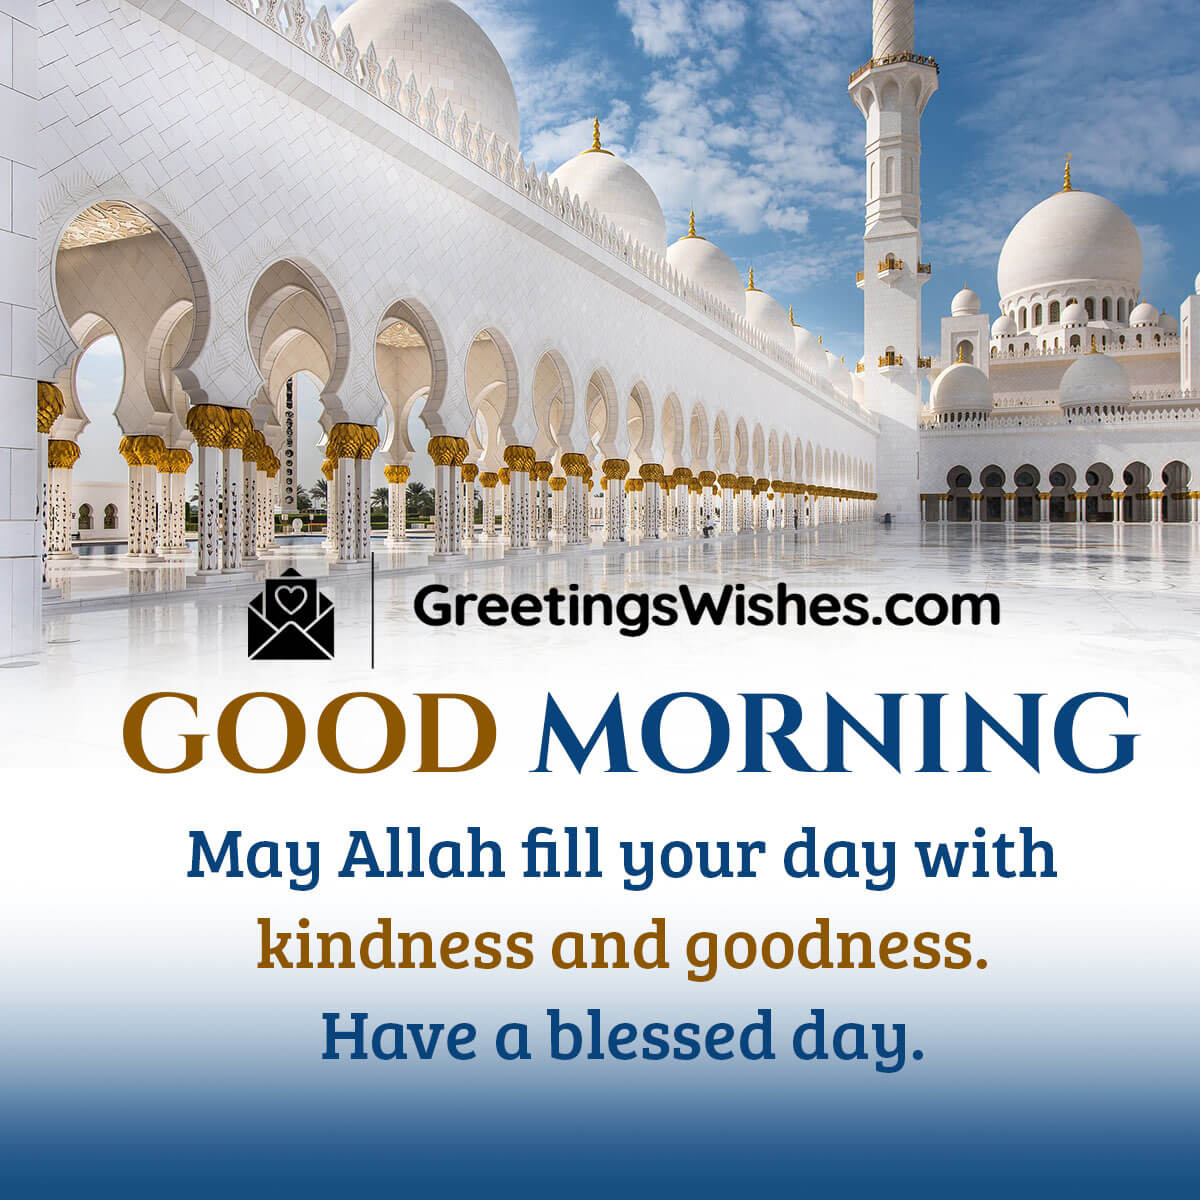 Good Morning - Greetings Wishes